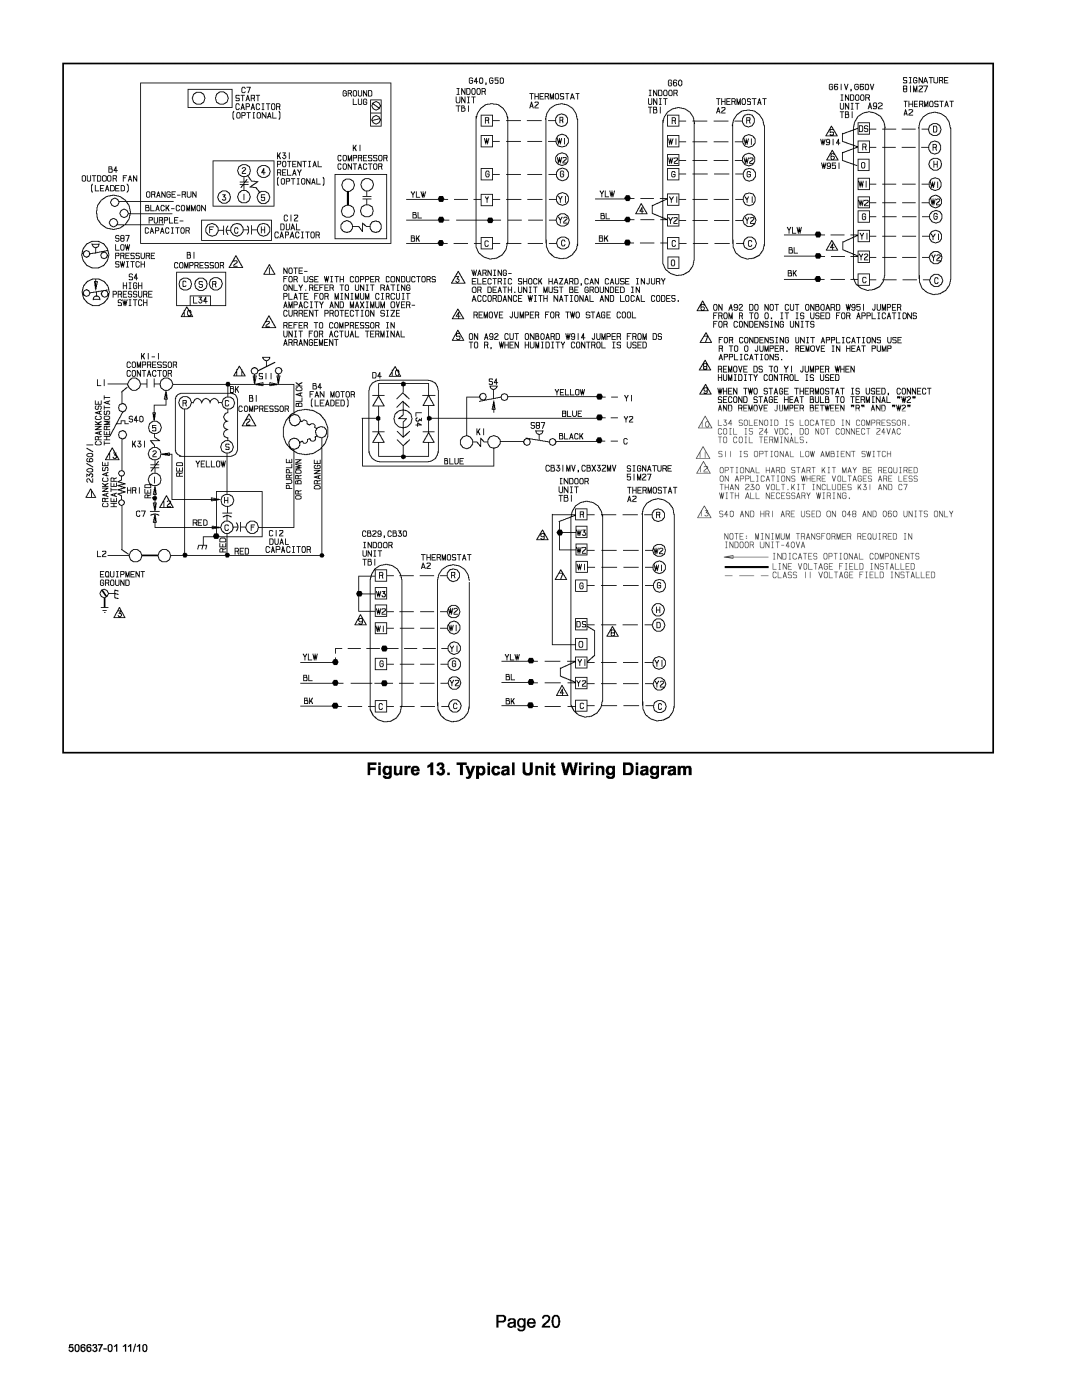 Lenox 506637-01, Elite Series X16 Air Conditioner Units installation instructions Typical Unit Wiring Diagram Page 